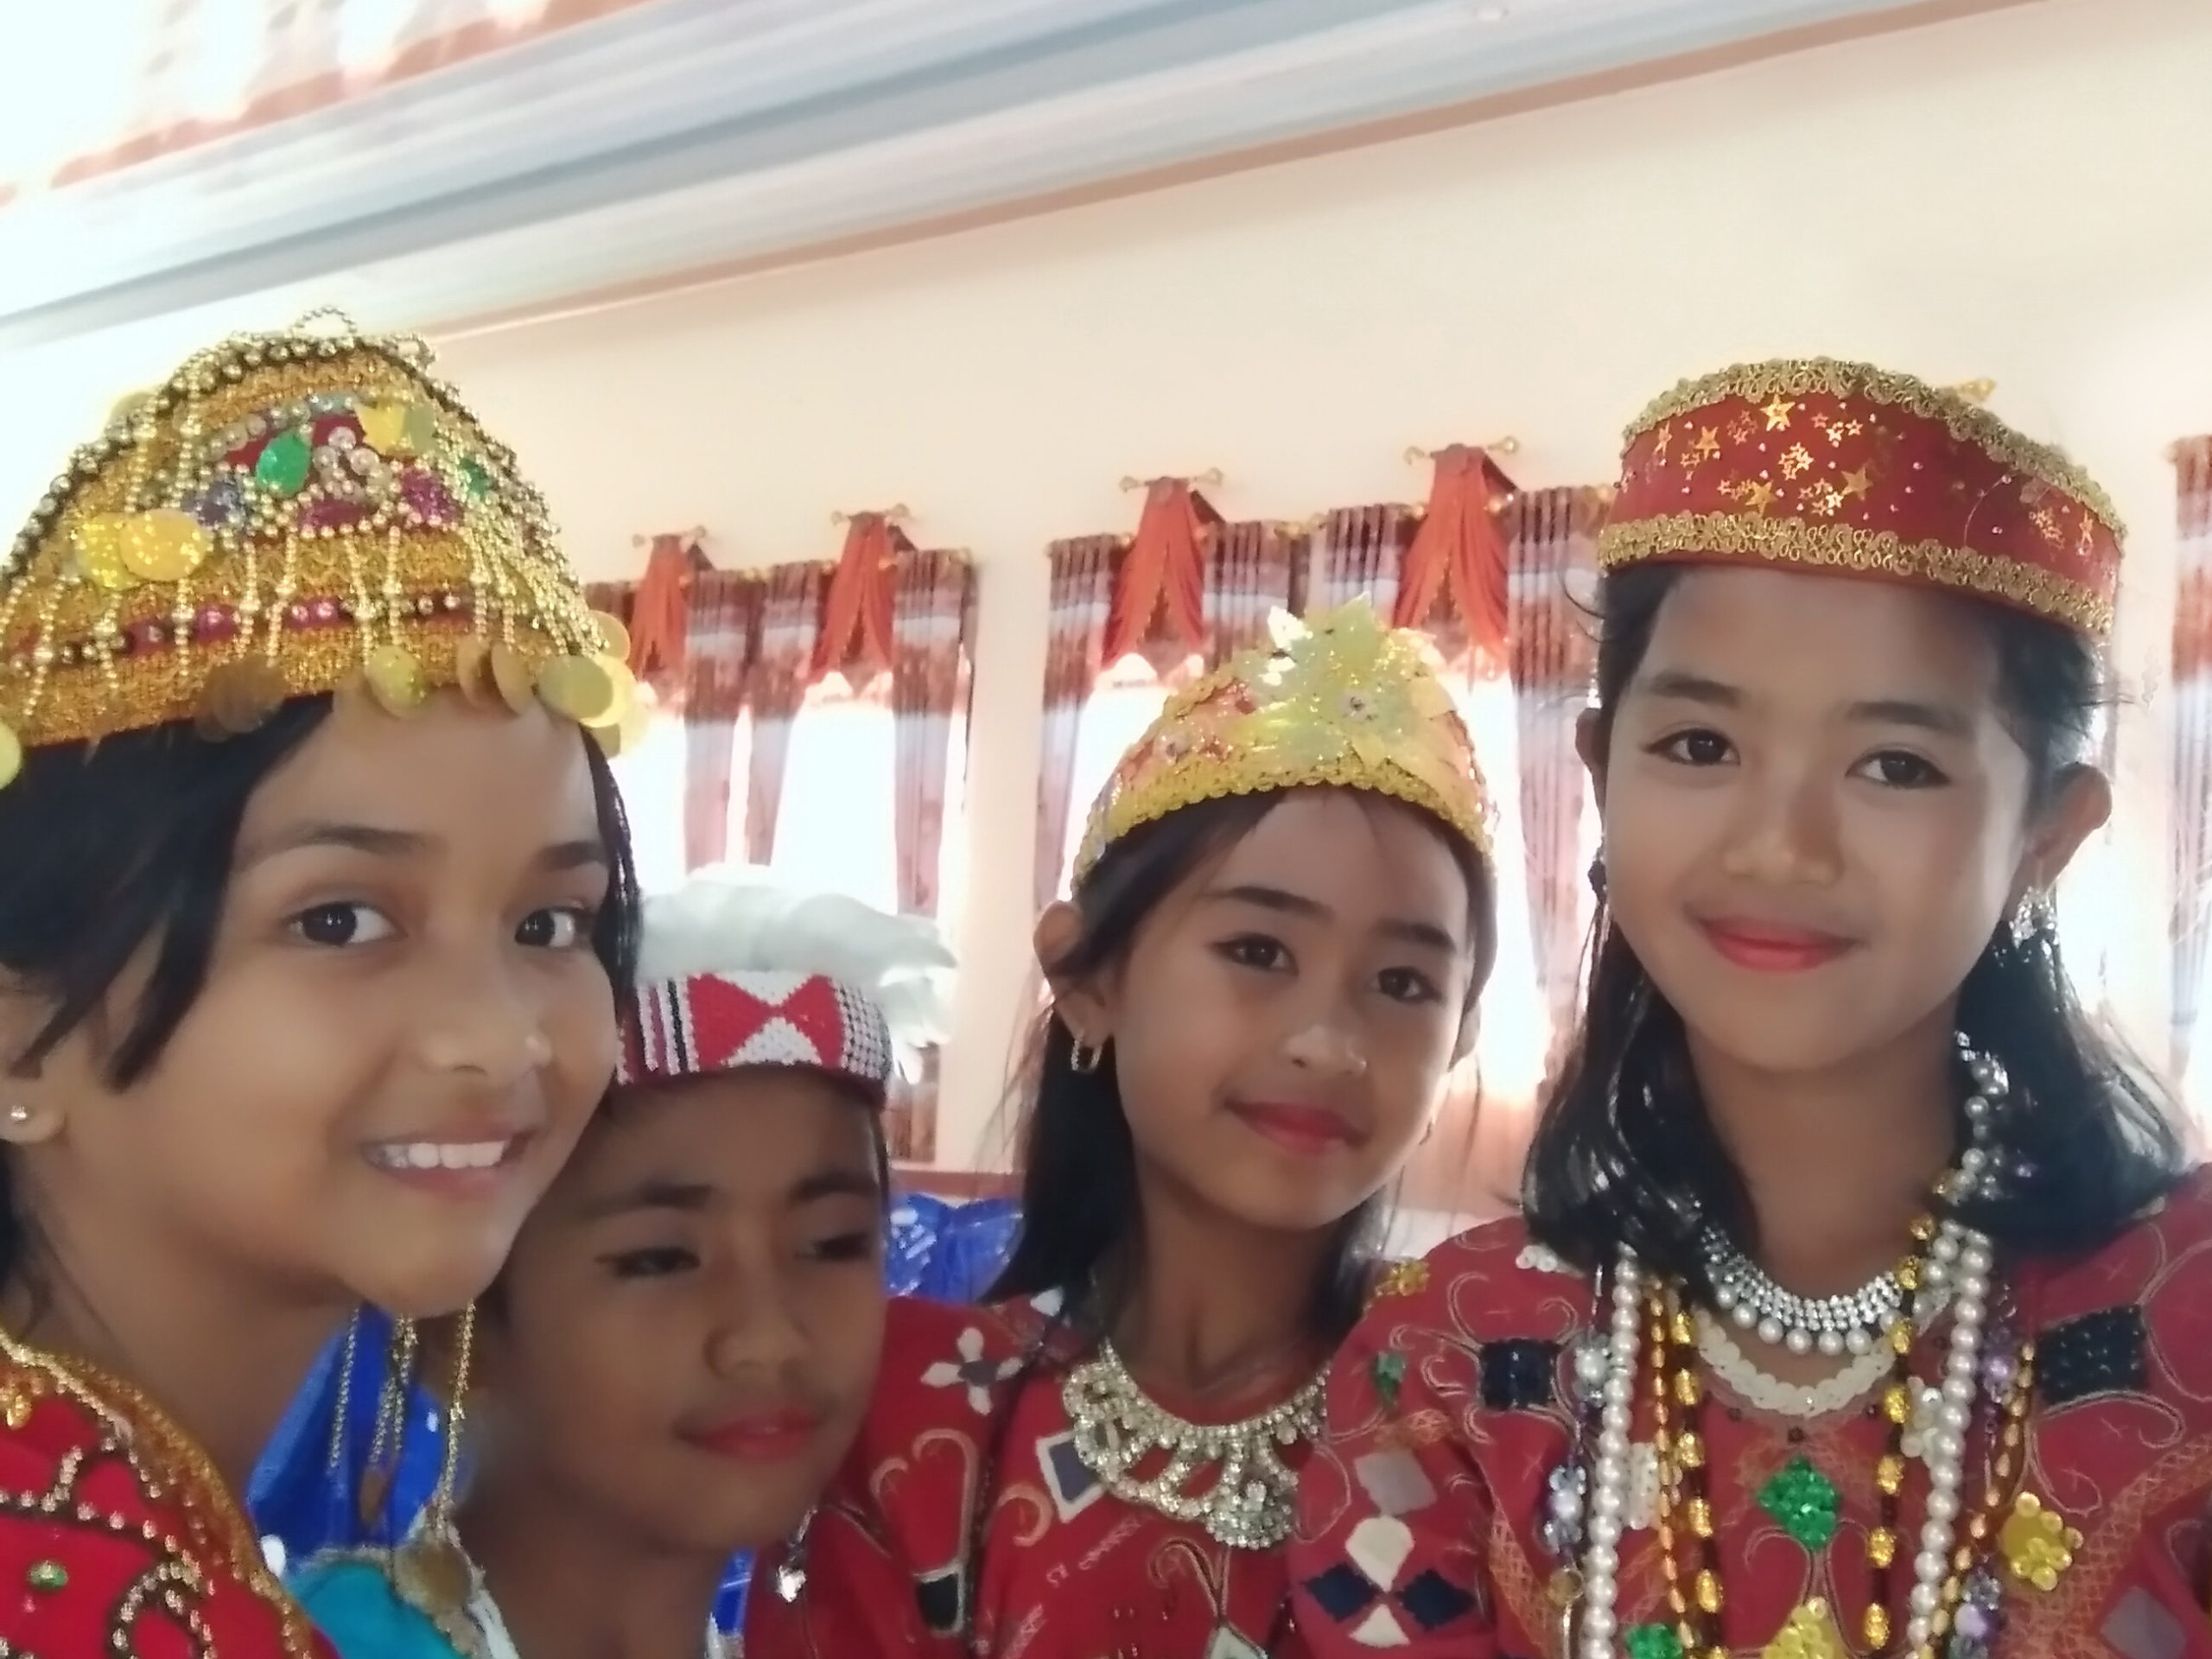 Image of four Tado girls at the Tado New Testament launch in Lindu, Indonesia